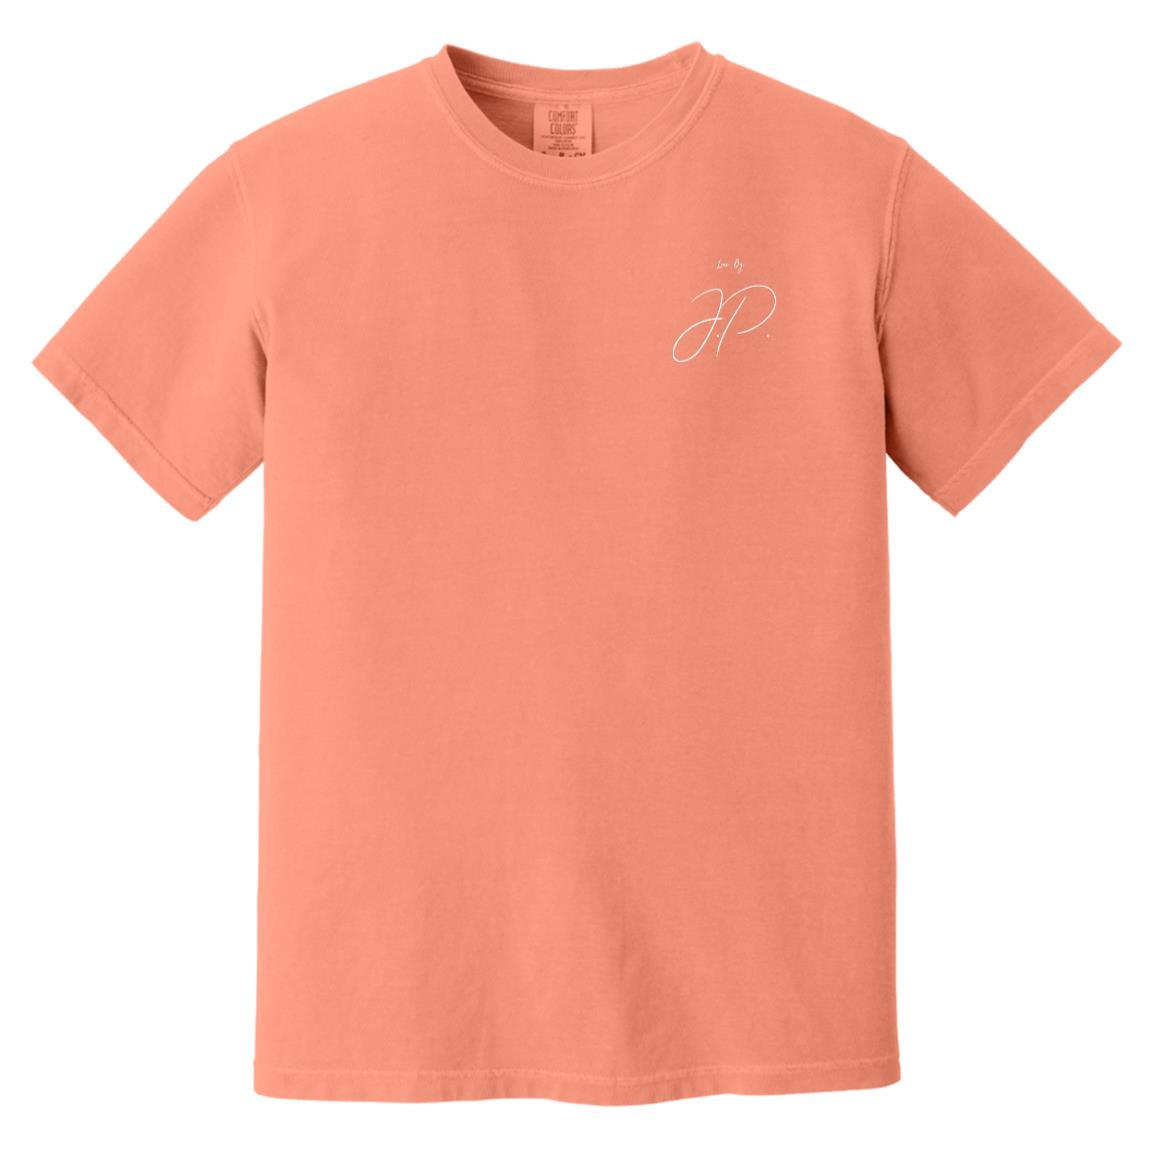 Lux. Heavyweight T-Shirt - Terracotta - Colors Edition